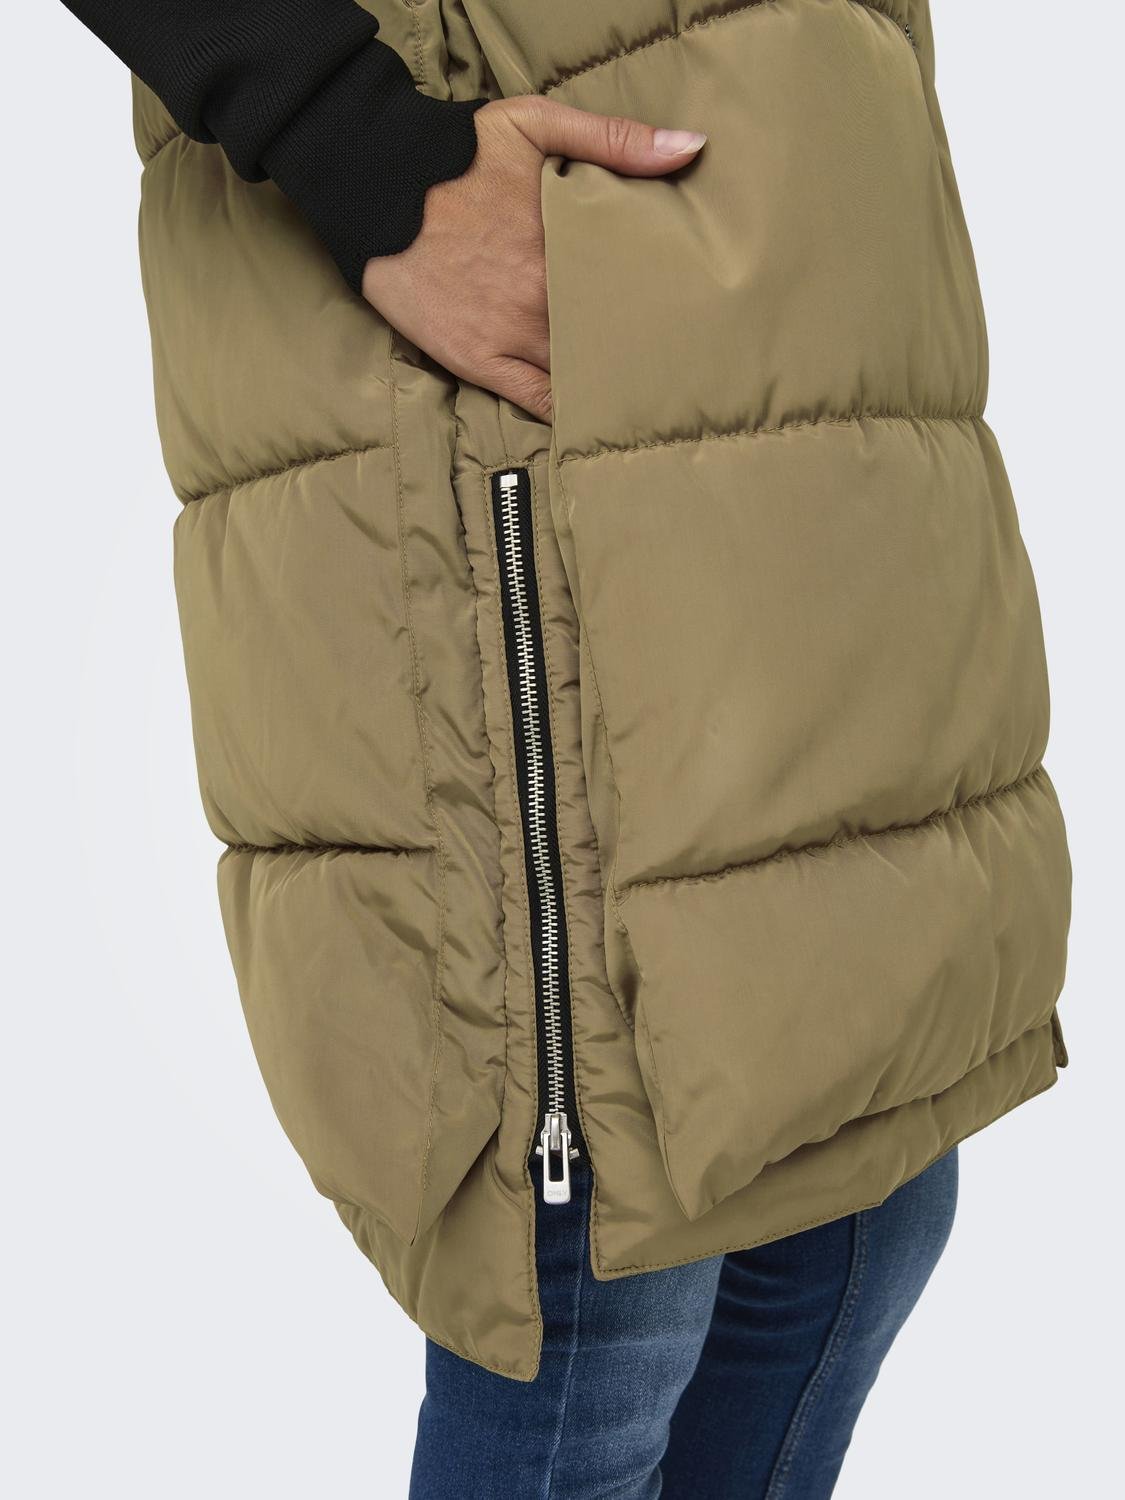 ONLY Gilets anti-froid Capuche -Otter - 15300259